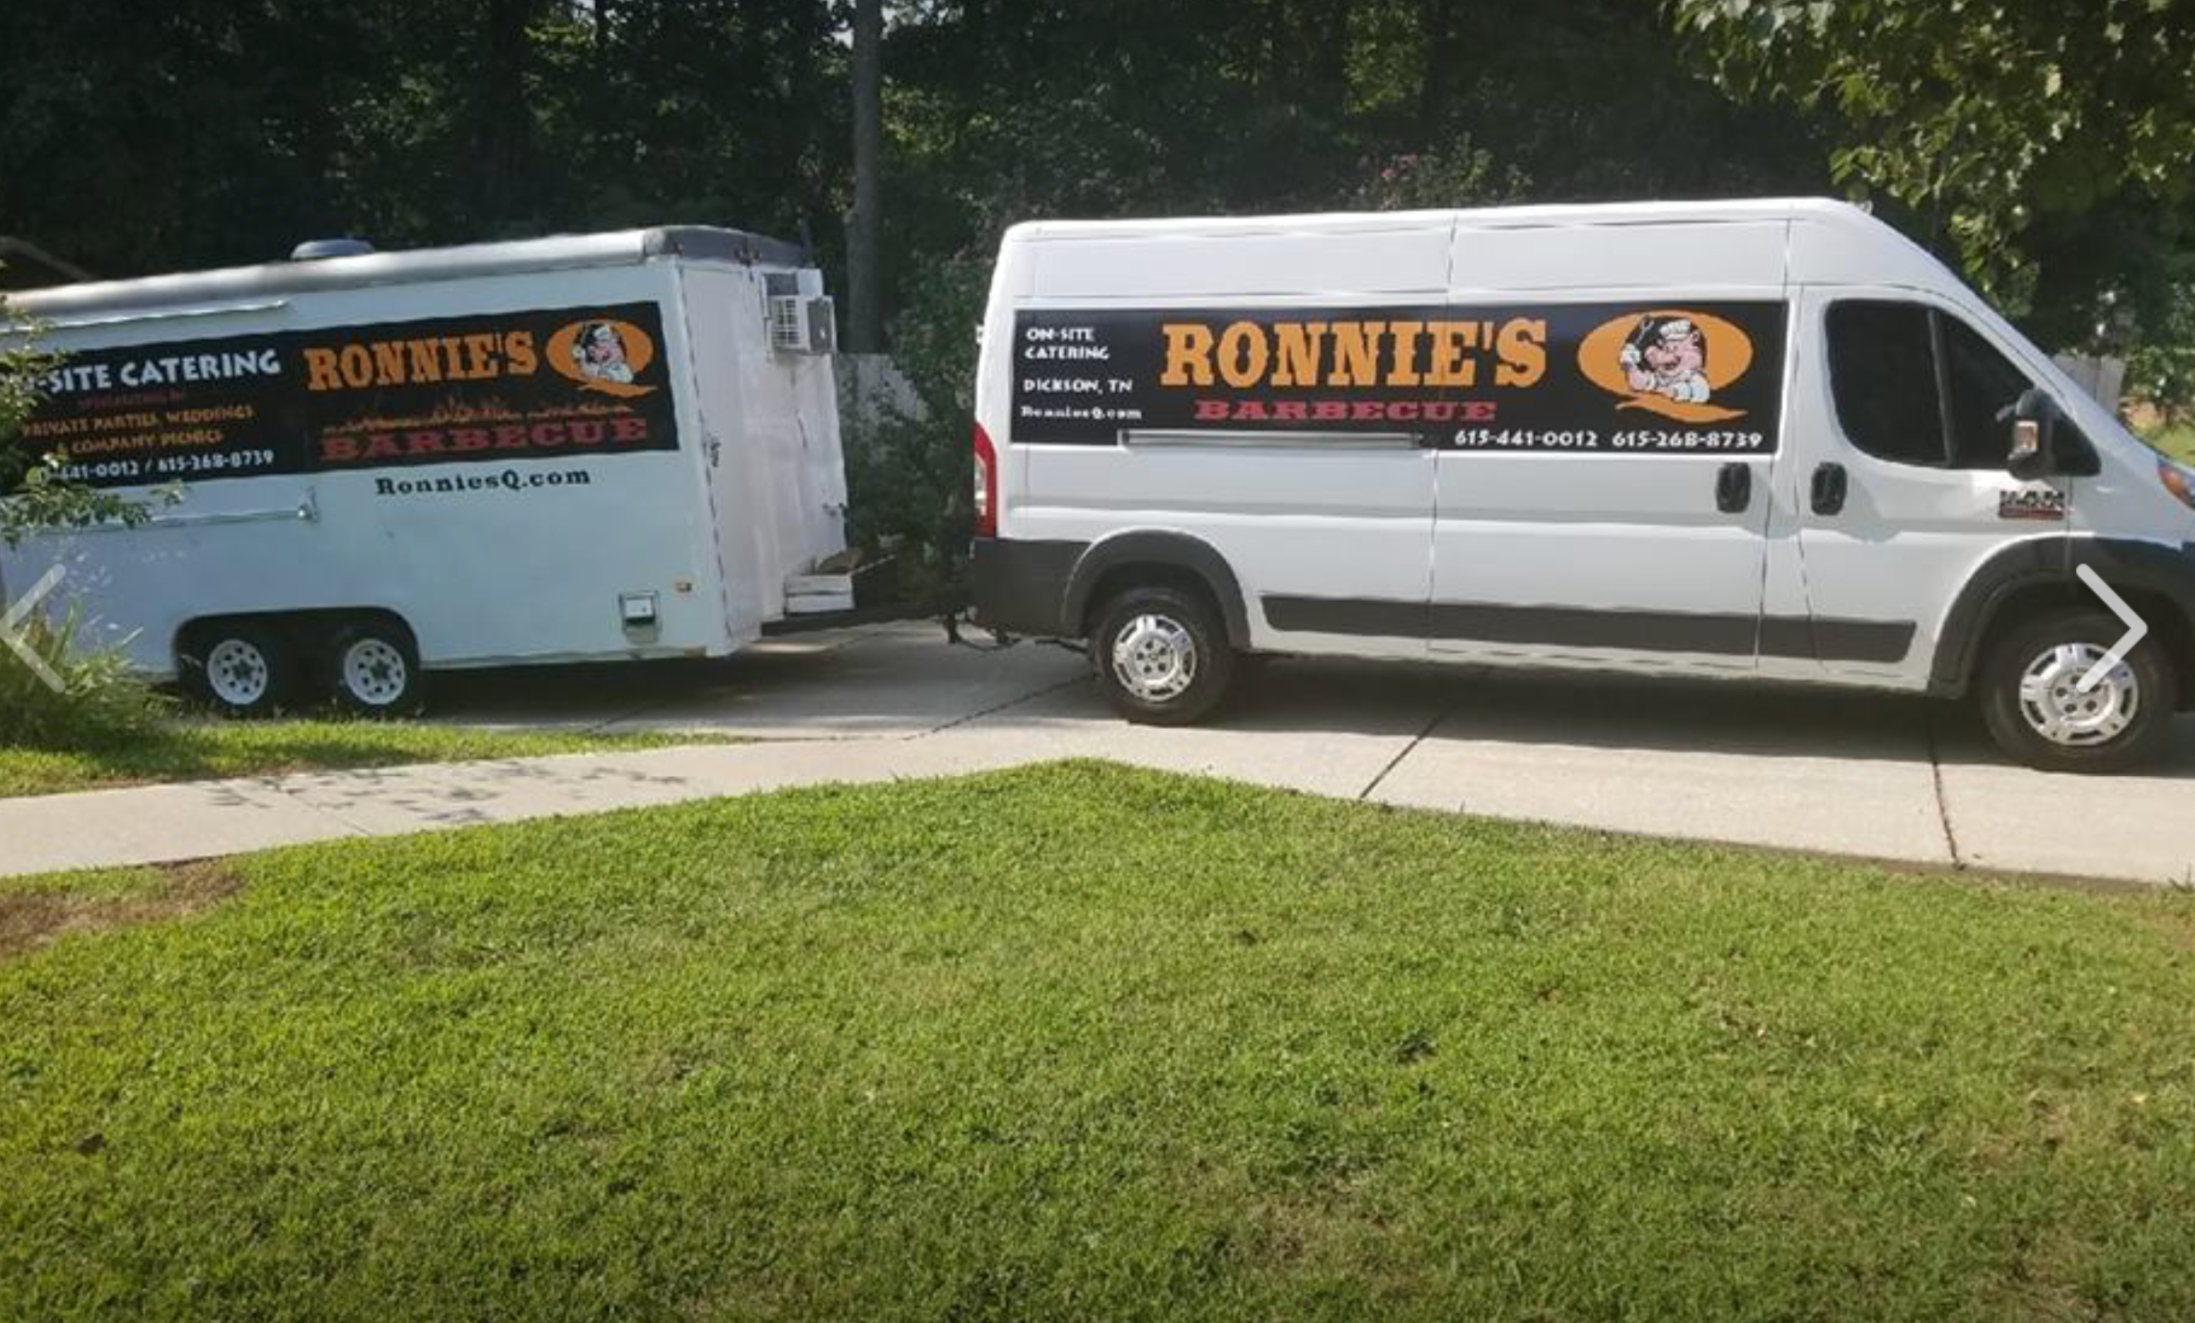 Welcome to Ronnie's Q BBQ!